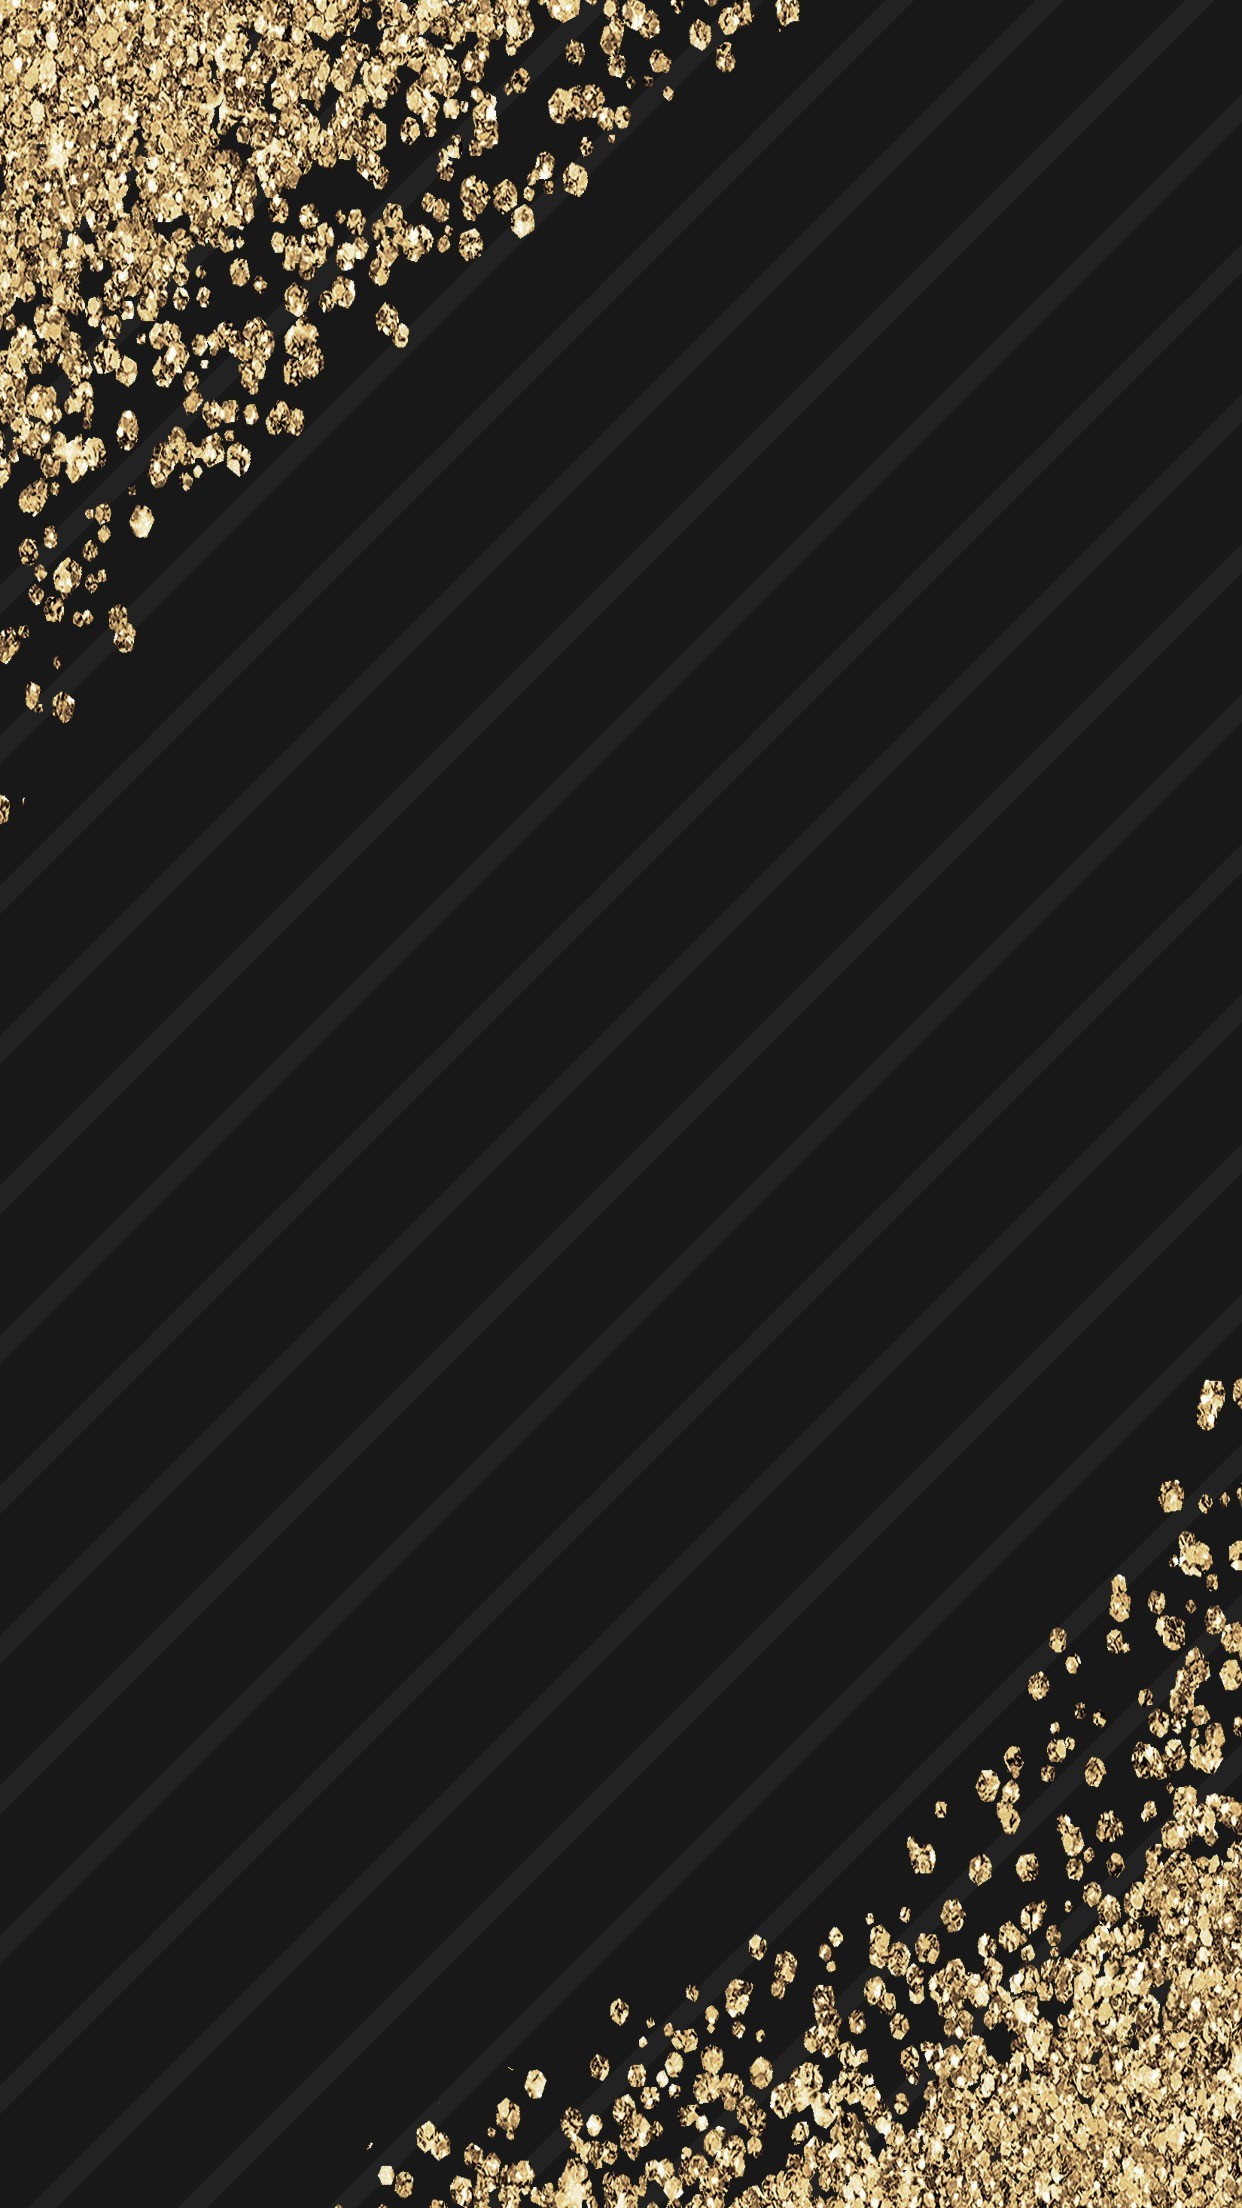 Black and Gold Abstract Wallpaper 57 images